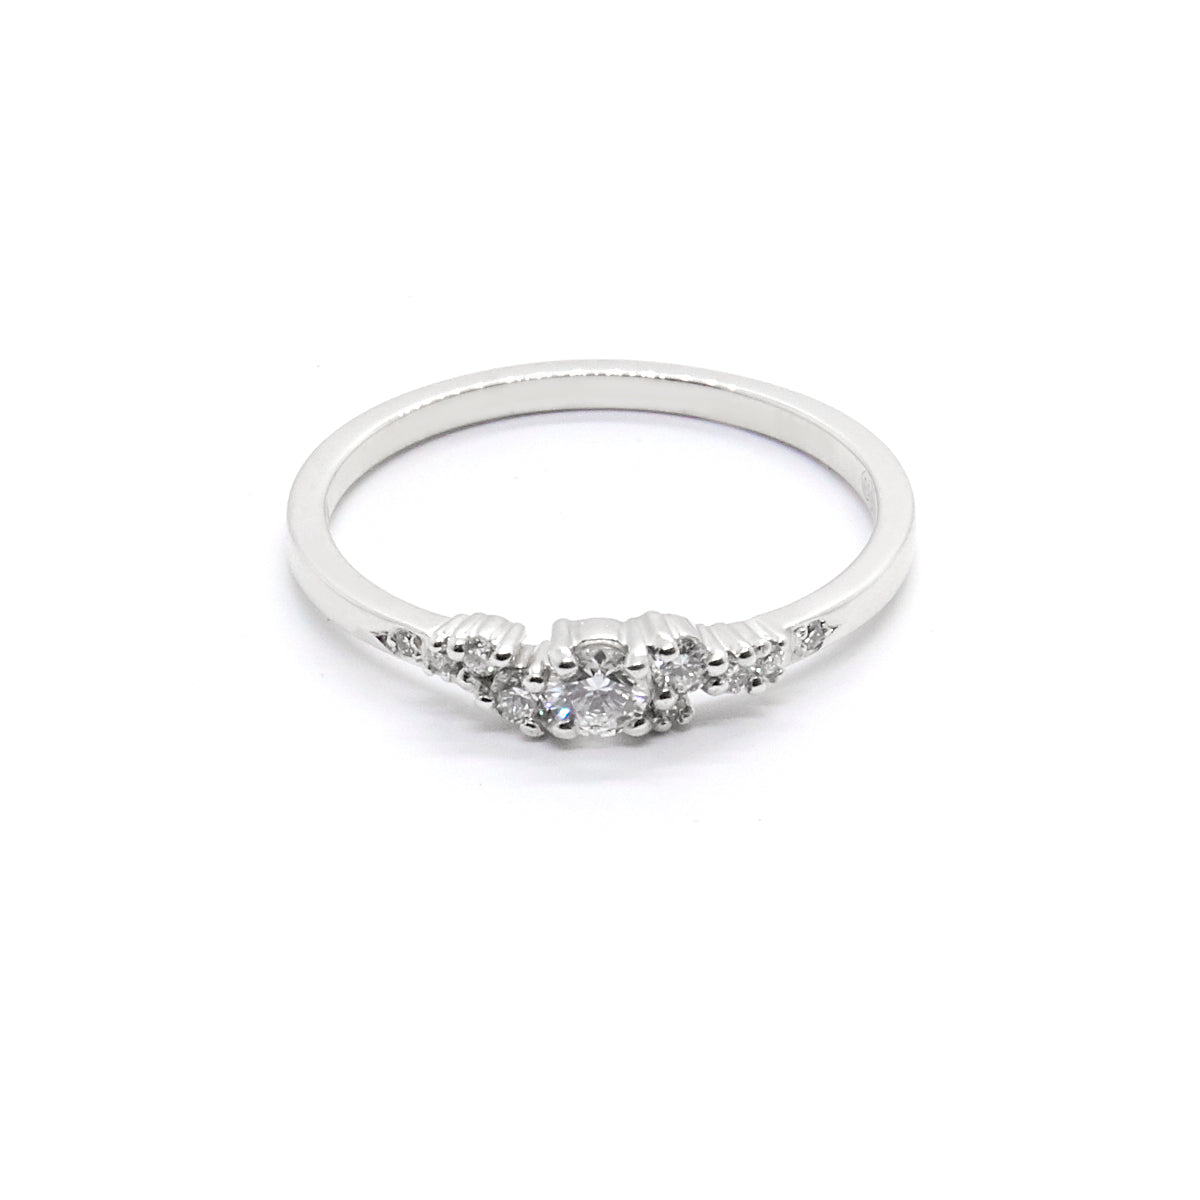 The Petite Diamond Cluster Engagement Ring in White Gold.